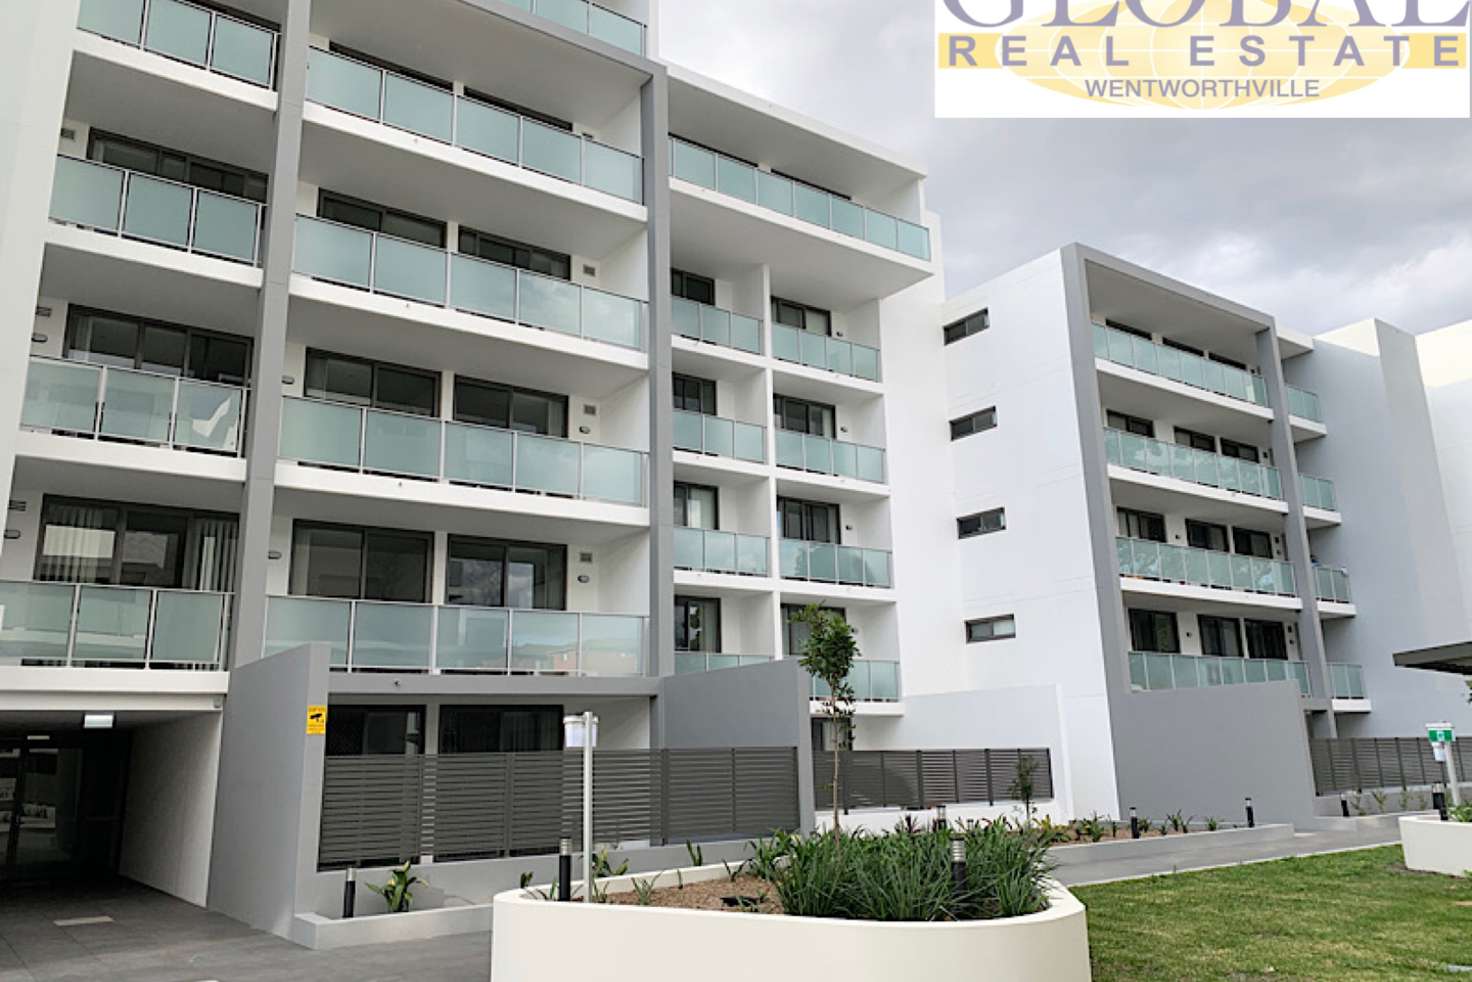 Main view of Homely apartment listing, 203/31 Garfield St, Wentworthville NSW 2145